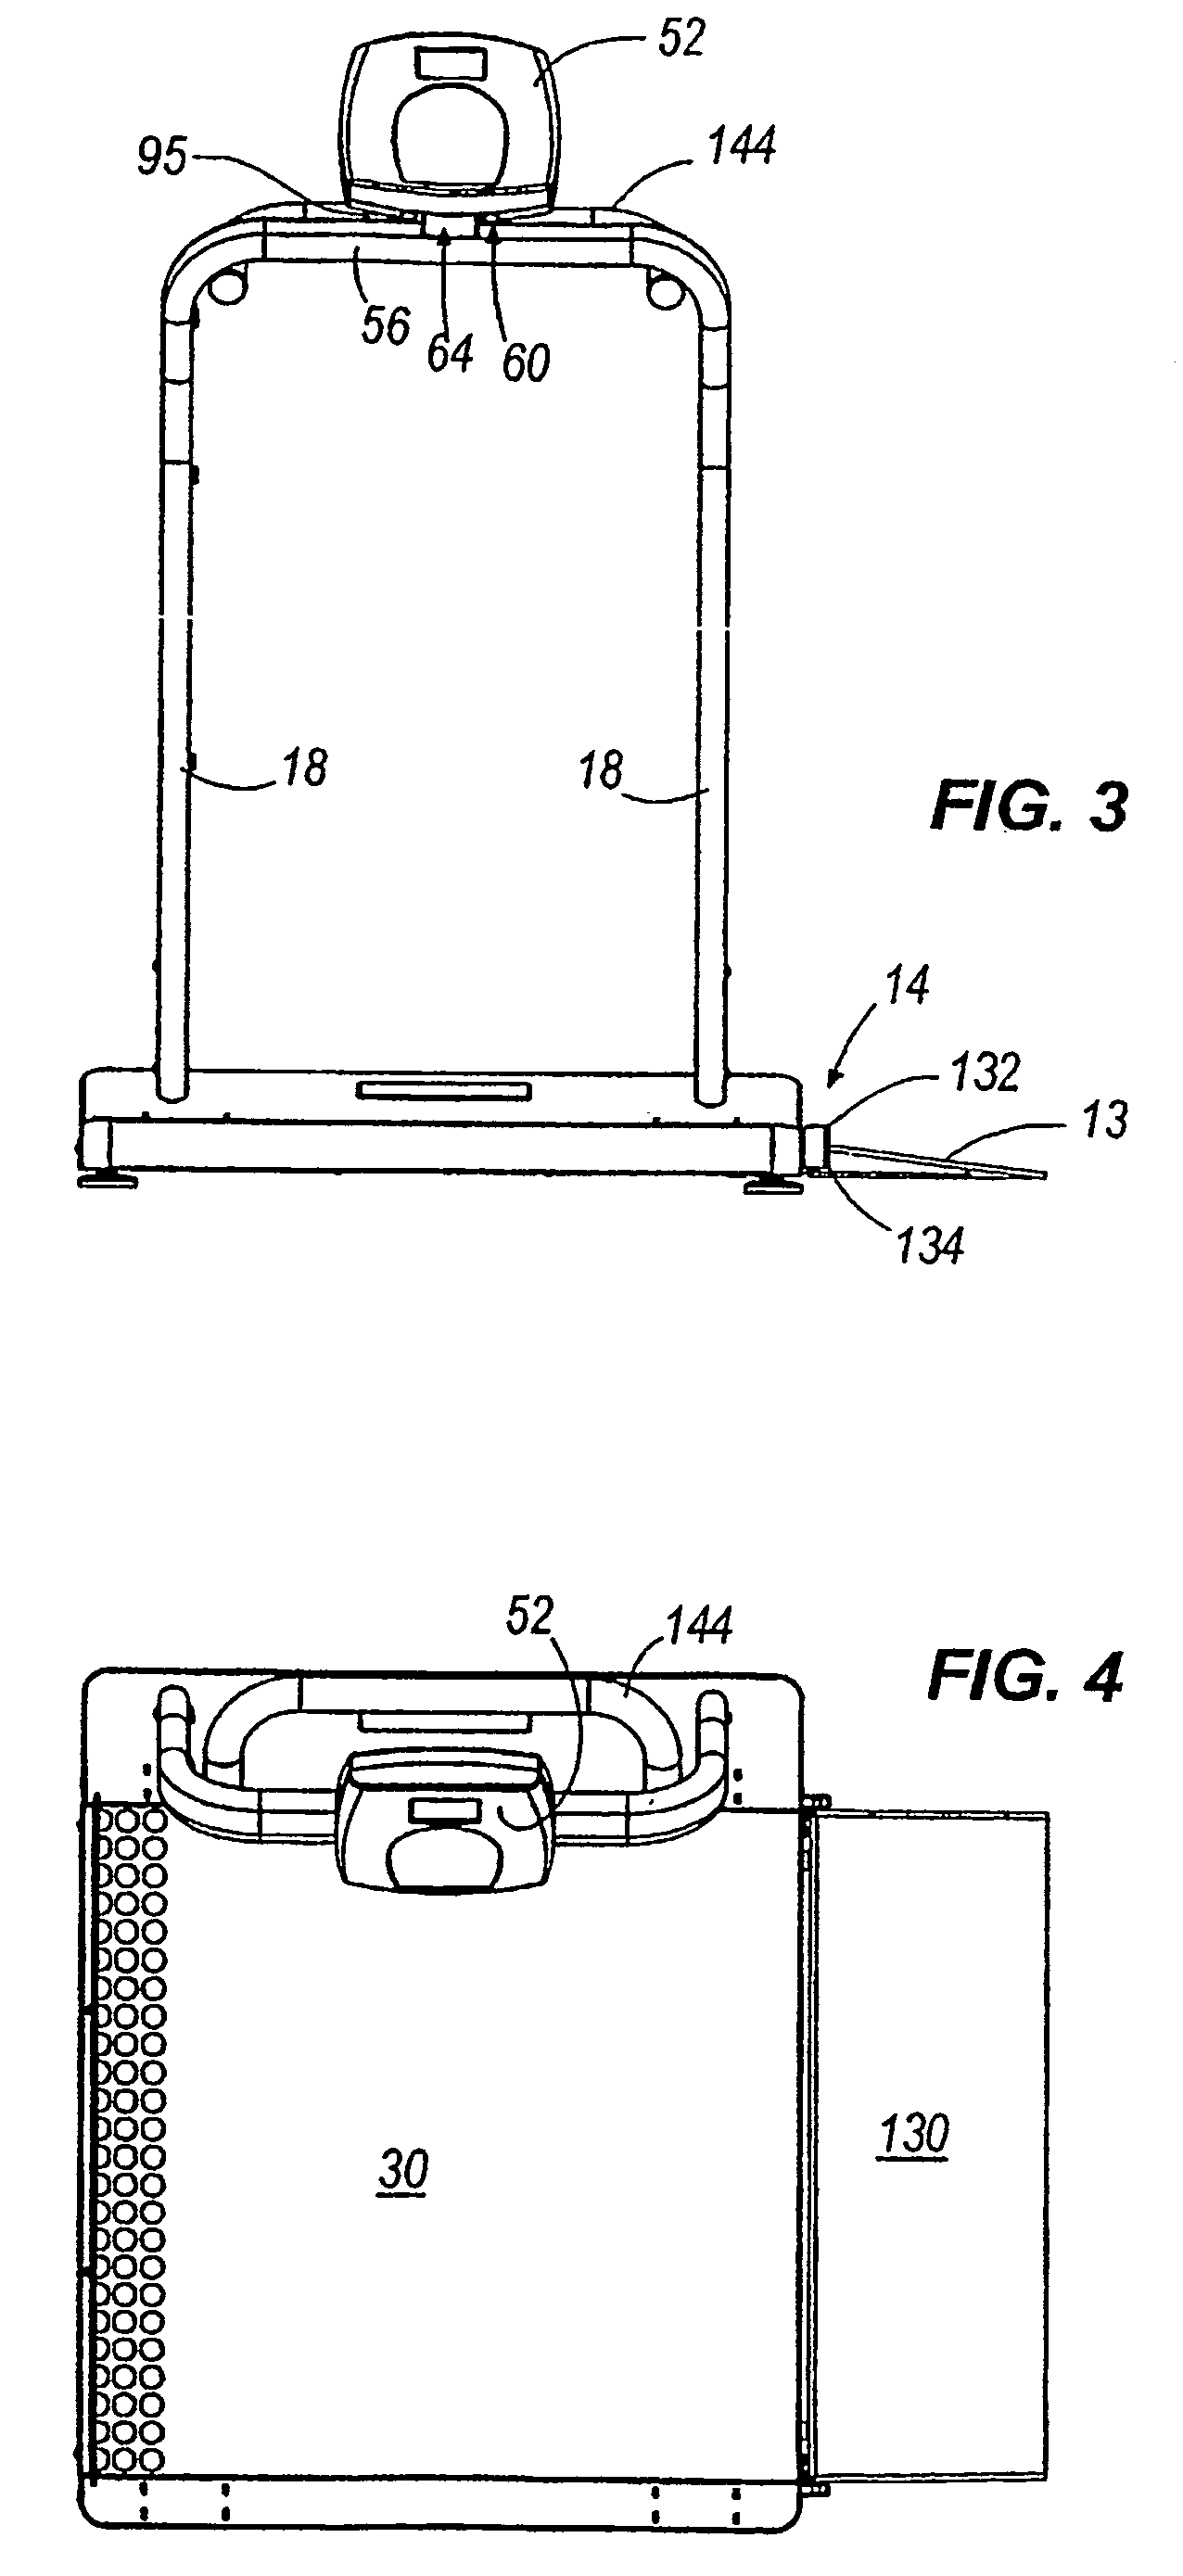 Measuring device, such as a scale or medical scale